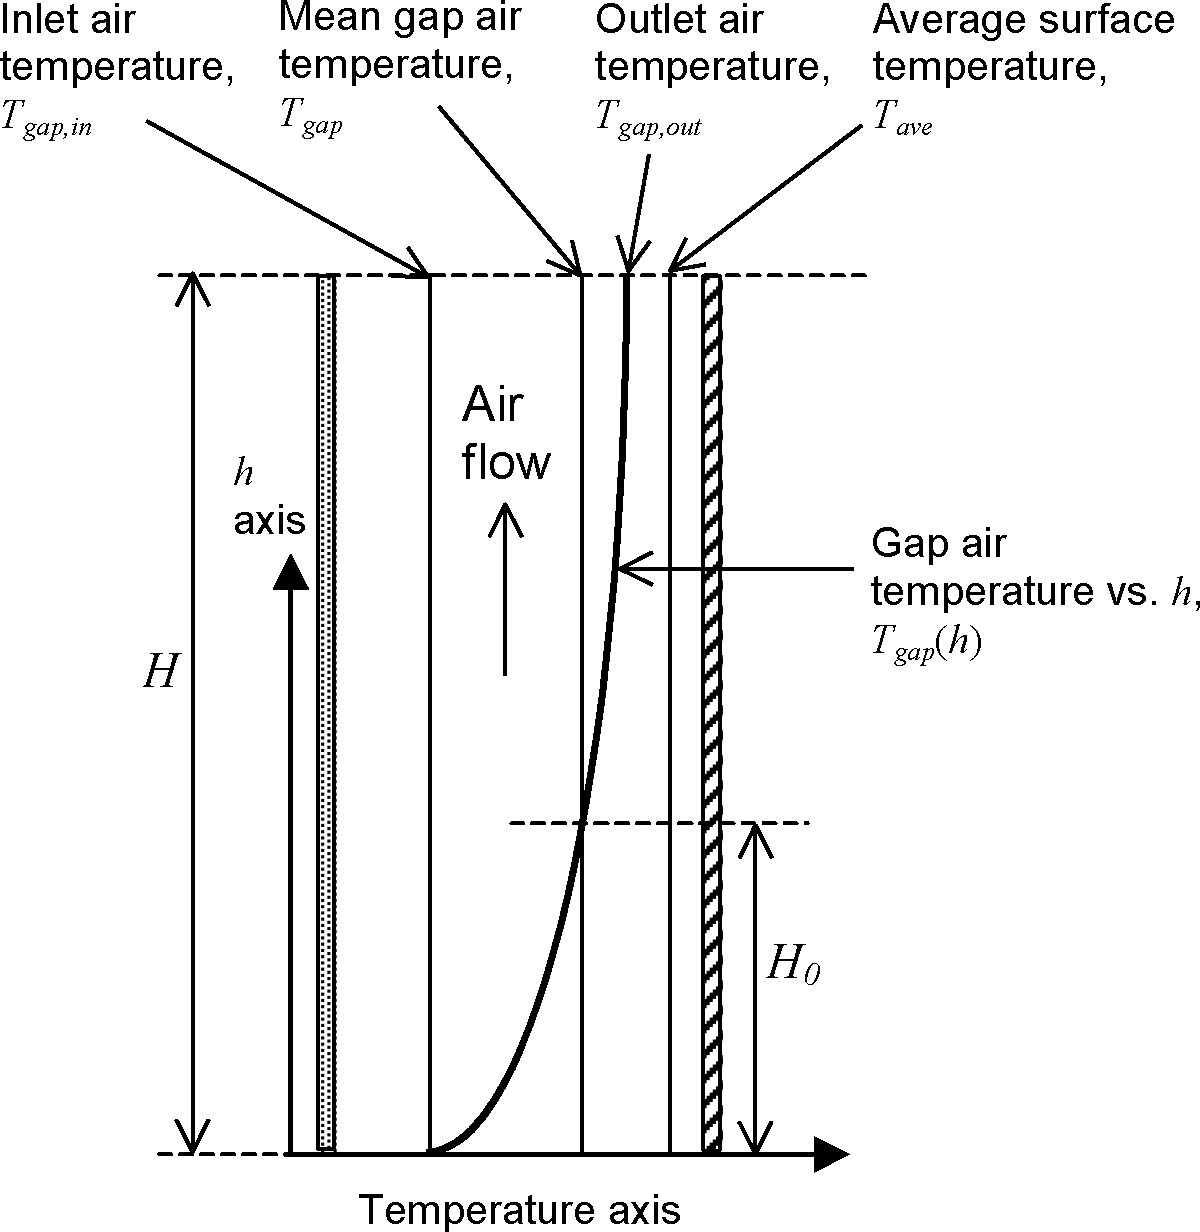 Variation of gap air temperature with distance from the inlet for upward flow. [fig:variation-of-gap-air-temperature-with]